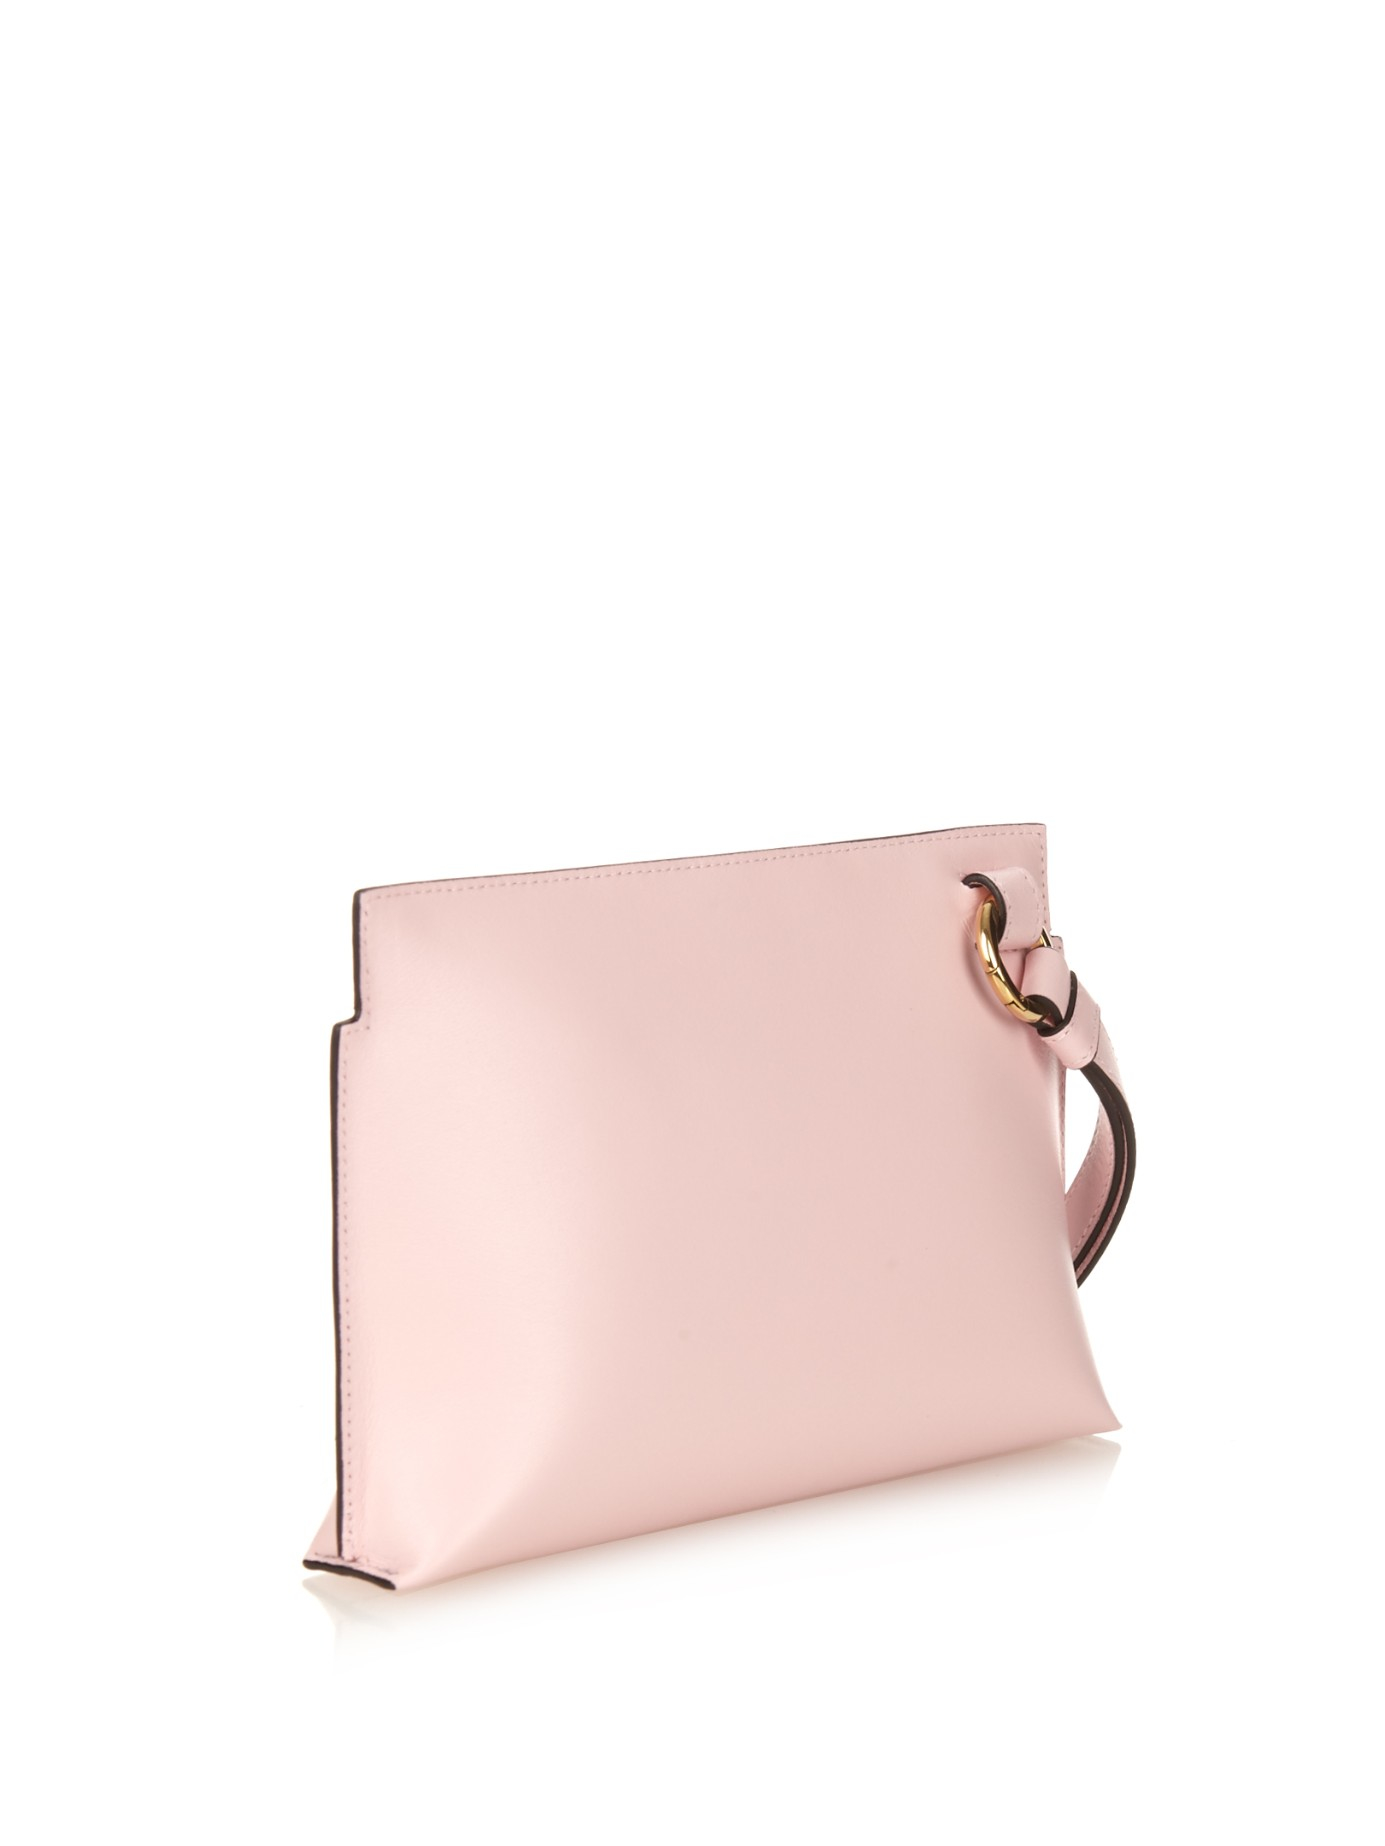 Loewe Small Wristlet-strap Leather Pouch in Light Pink (Pink) - Lyst